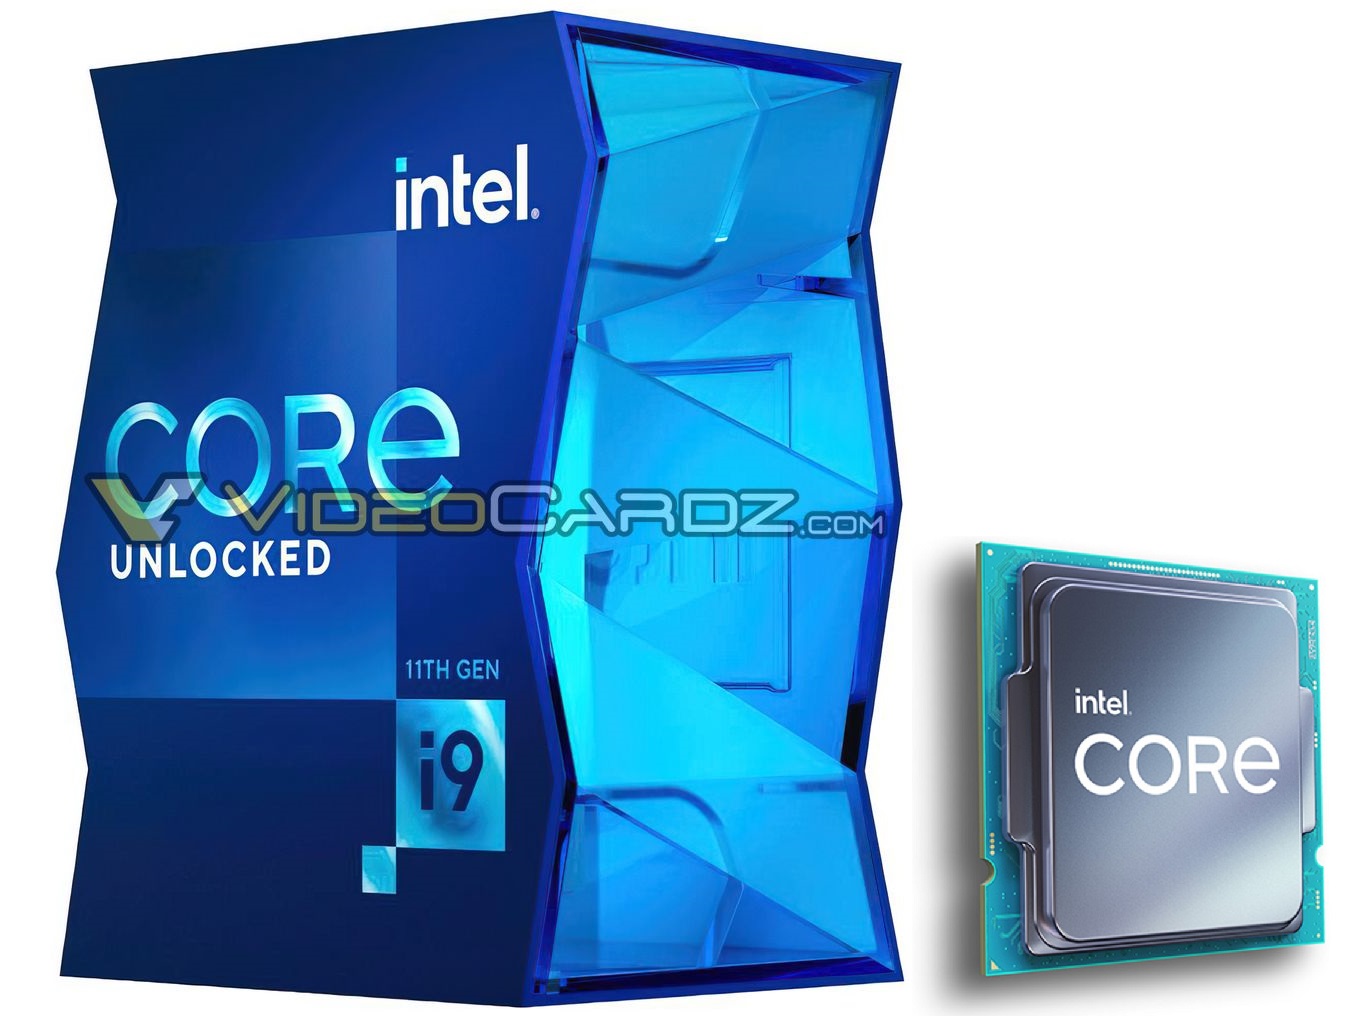 Intel Core i9-12900K Spotted in the Wild With Flashy Retail Packaging